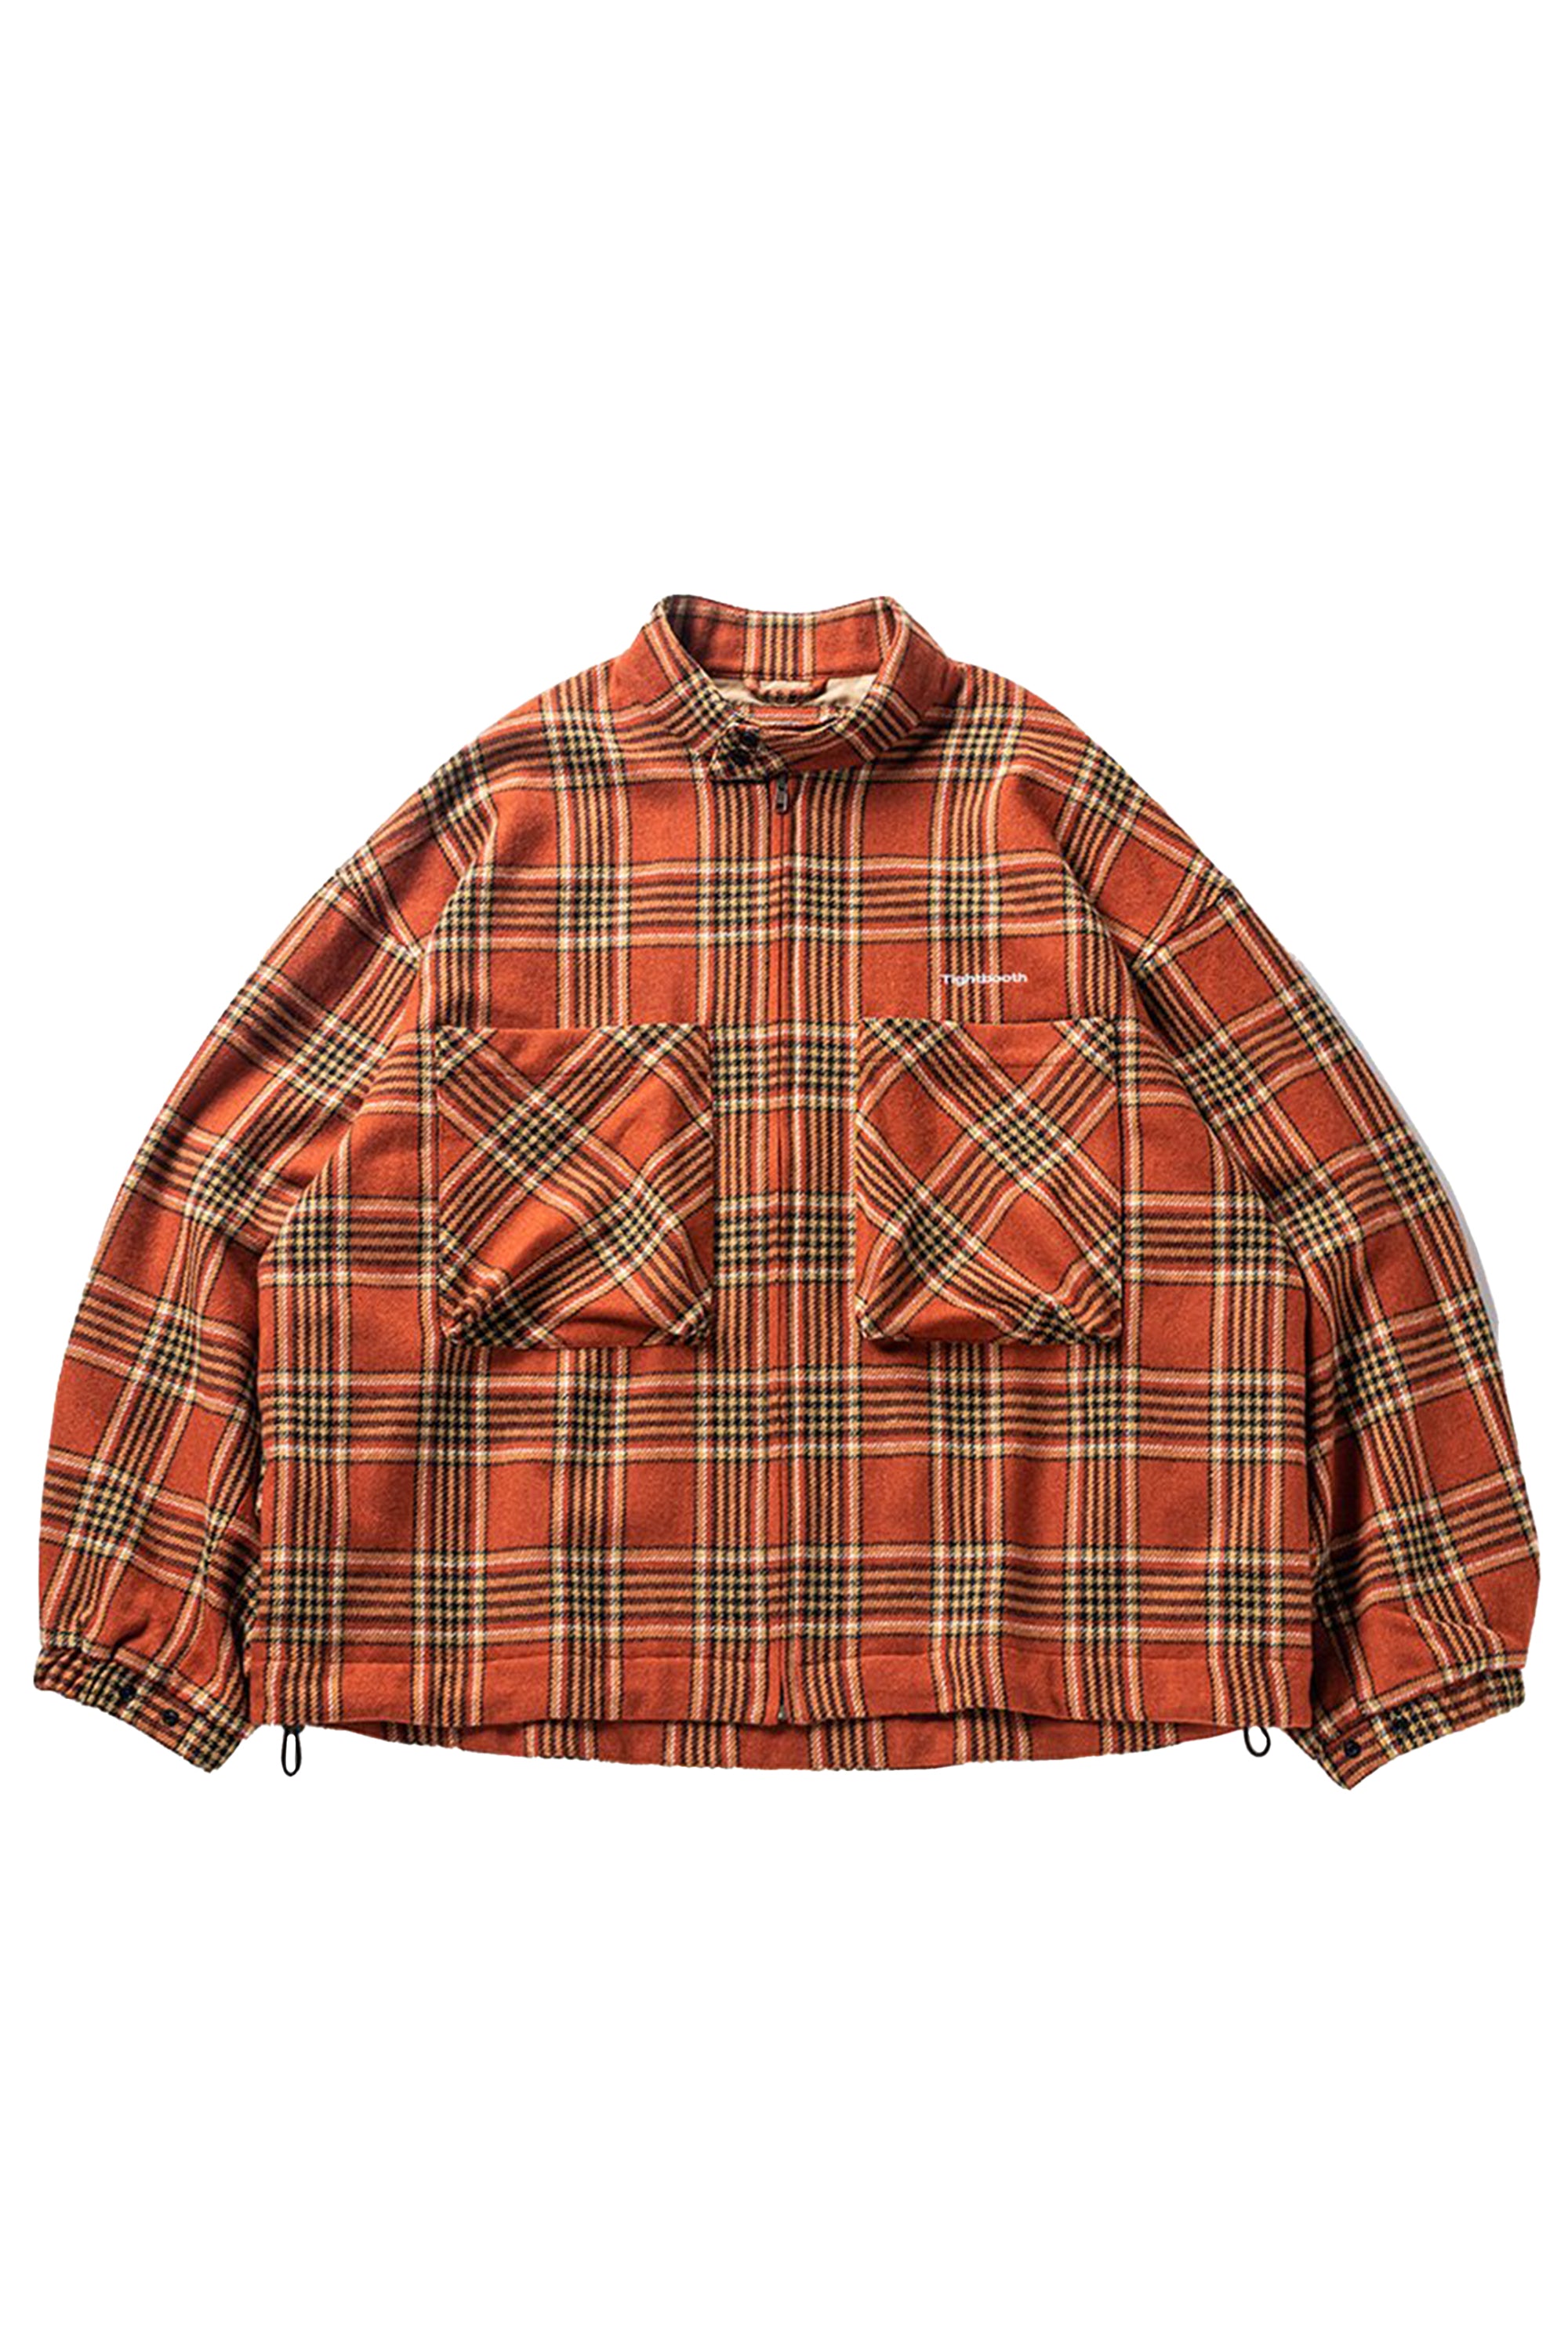 TIGHTBOOTH タイトブース FW23 PLAID FLANNEL SWING TOP